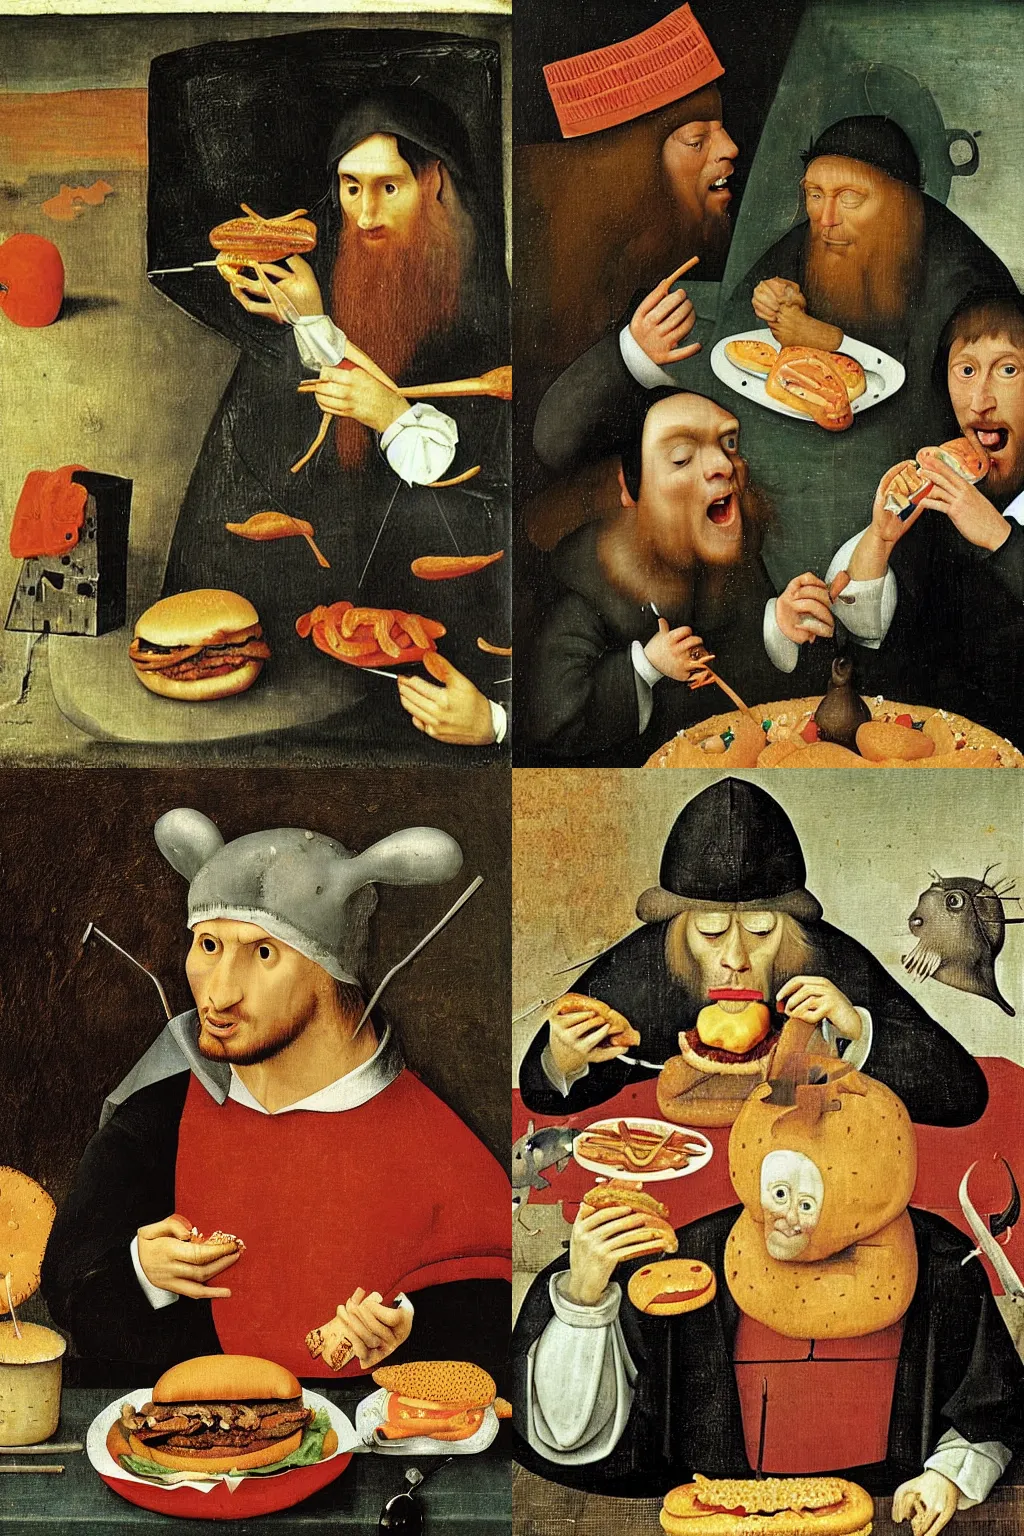 Leonel Messi eating a hamburger by Hieronymus Bosch | Stable Diffusion ...